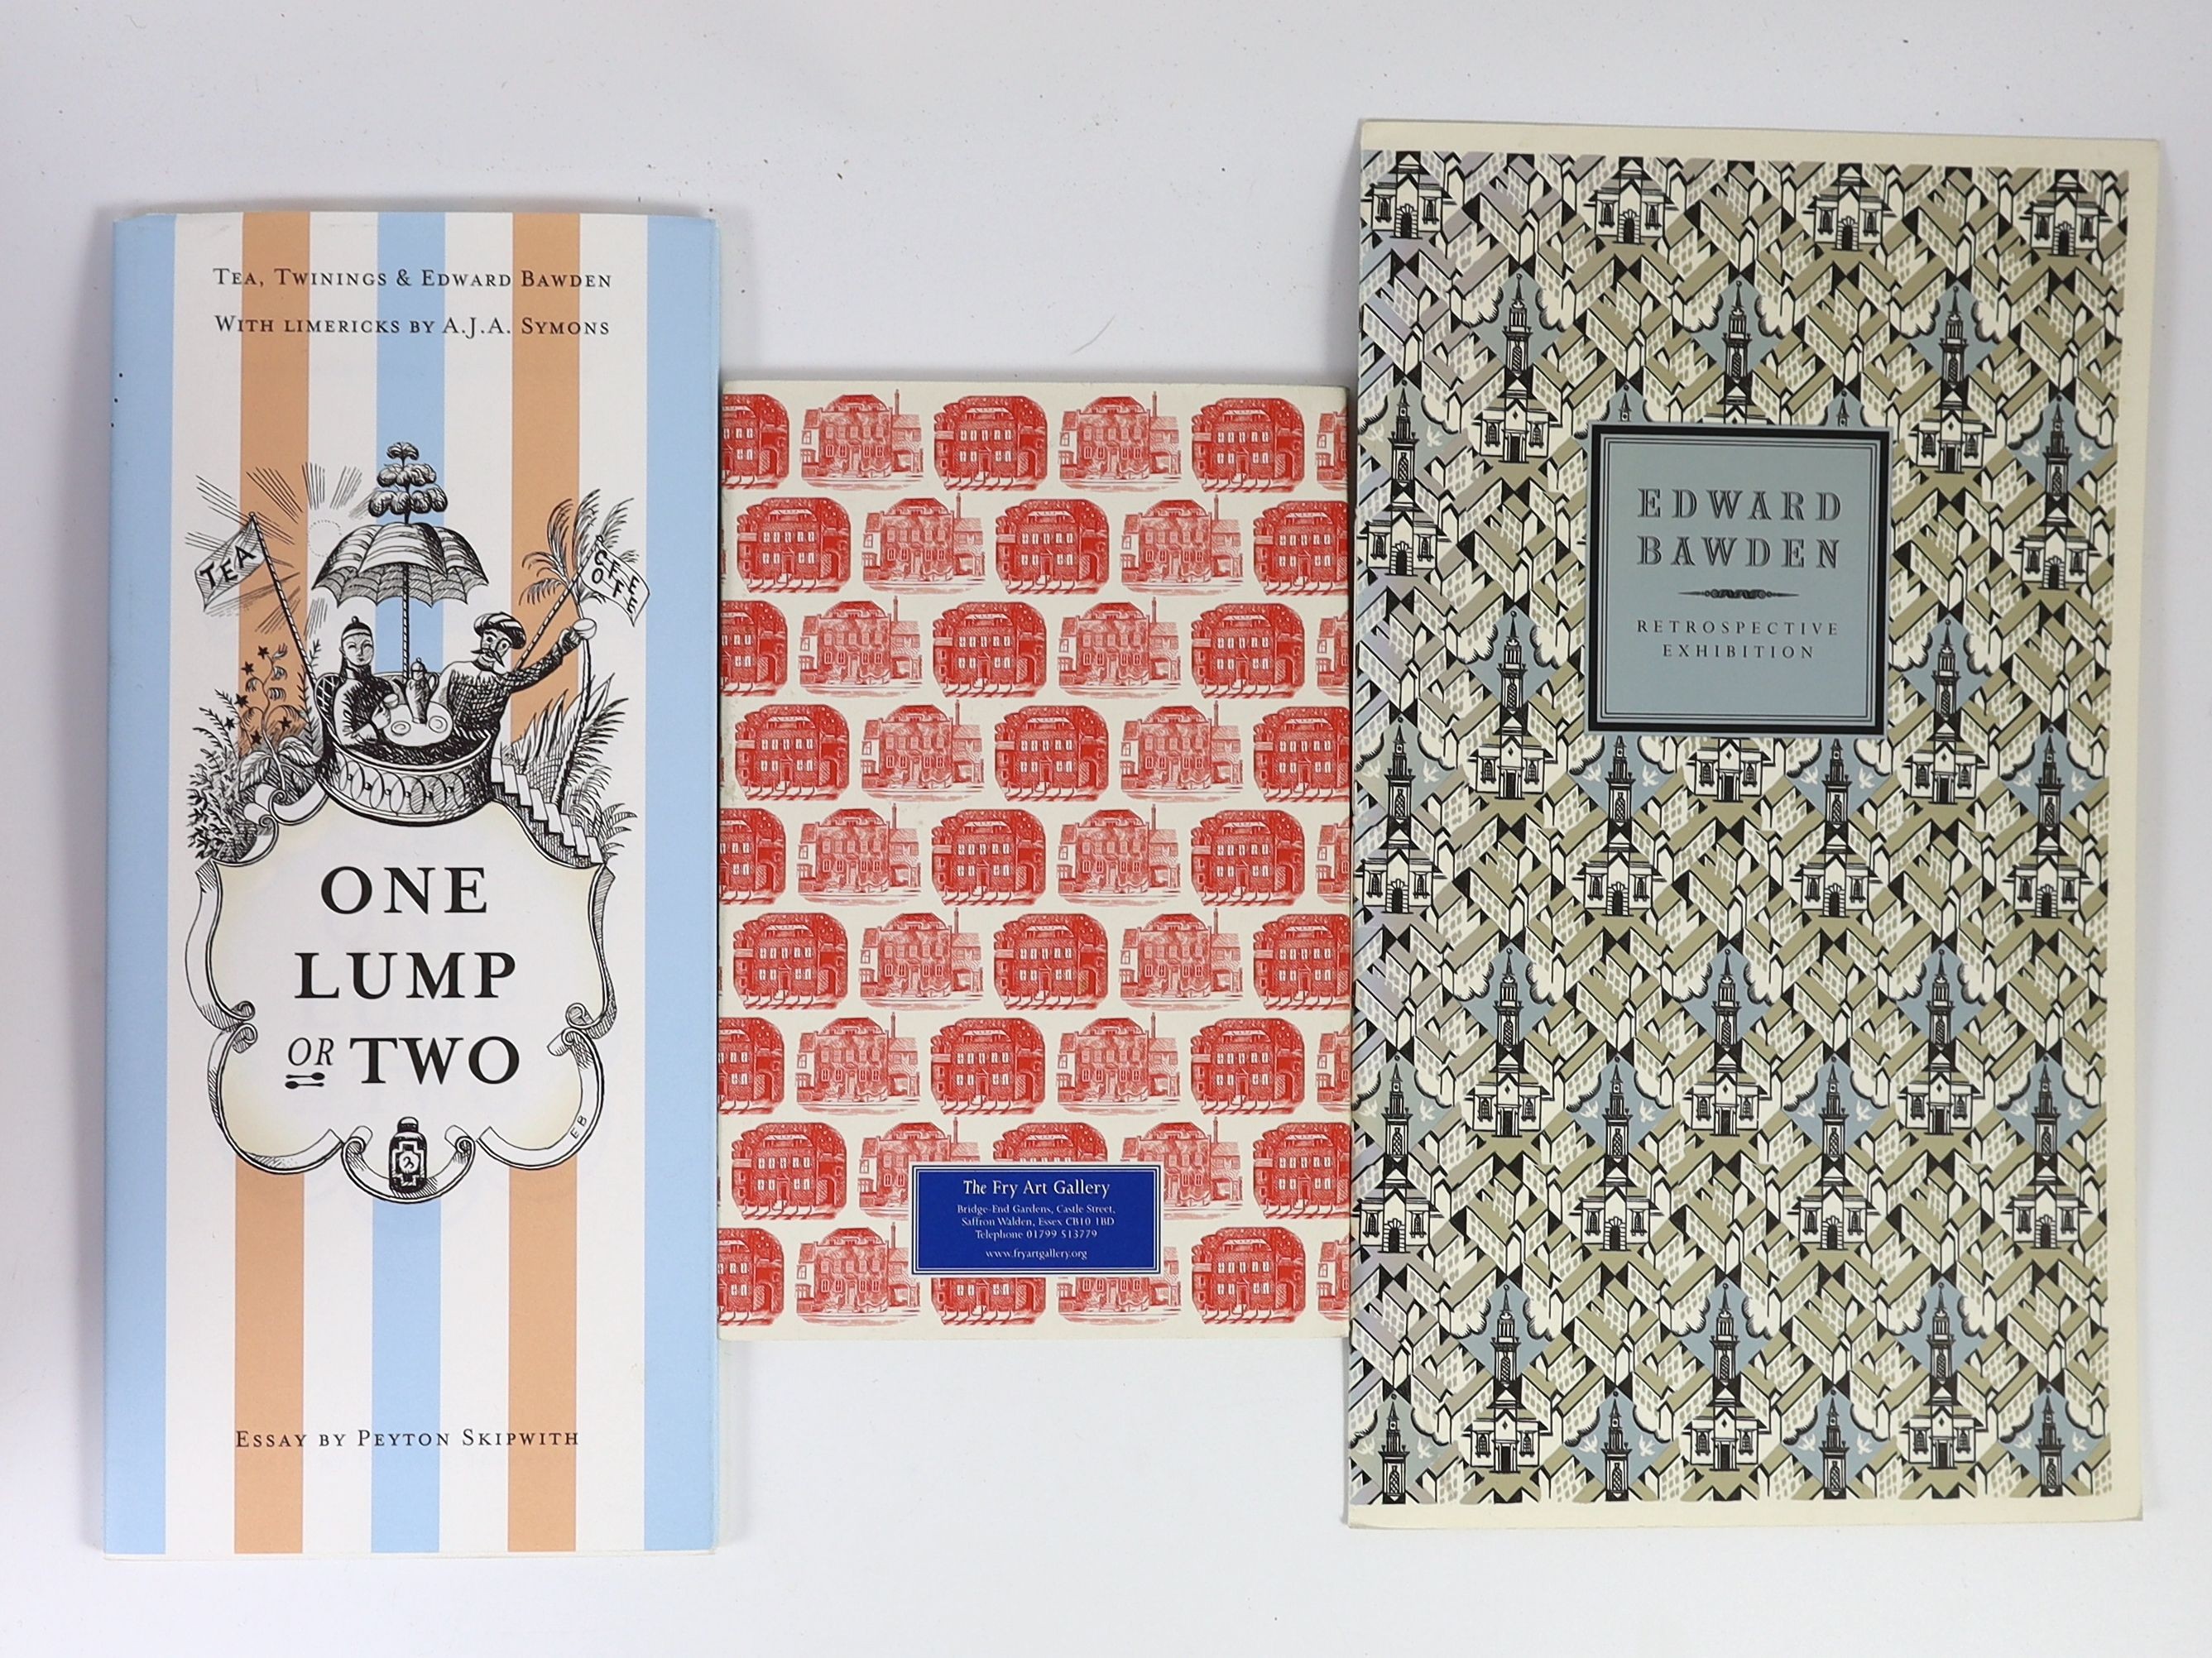 Bawden, Edward - 12 works, about or Illustrated by:- Weaver, Nigel - Edward Bawden In the Middle East, 2008; The Queen’s Beasts, 1953; Bacon, Caroline and McGregor, James - Edward Bawden, one of 2000, 2008; Hoyle, Walter